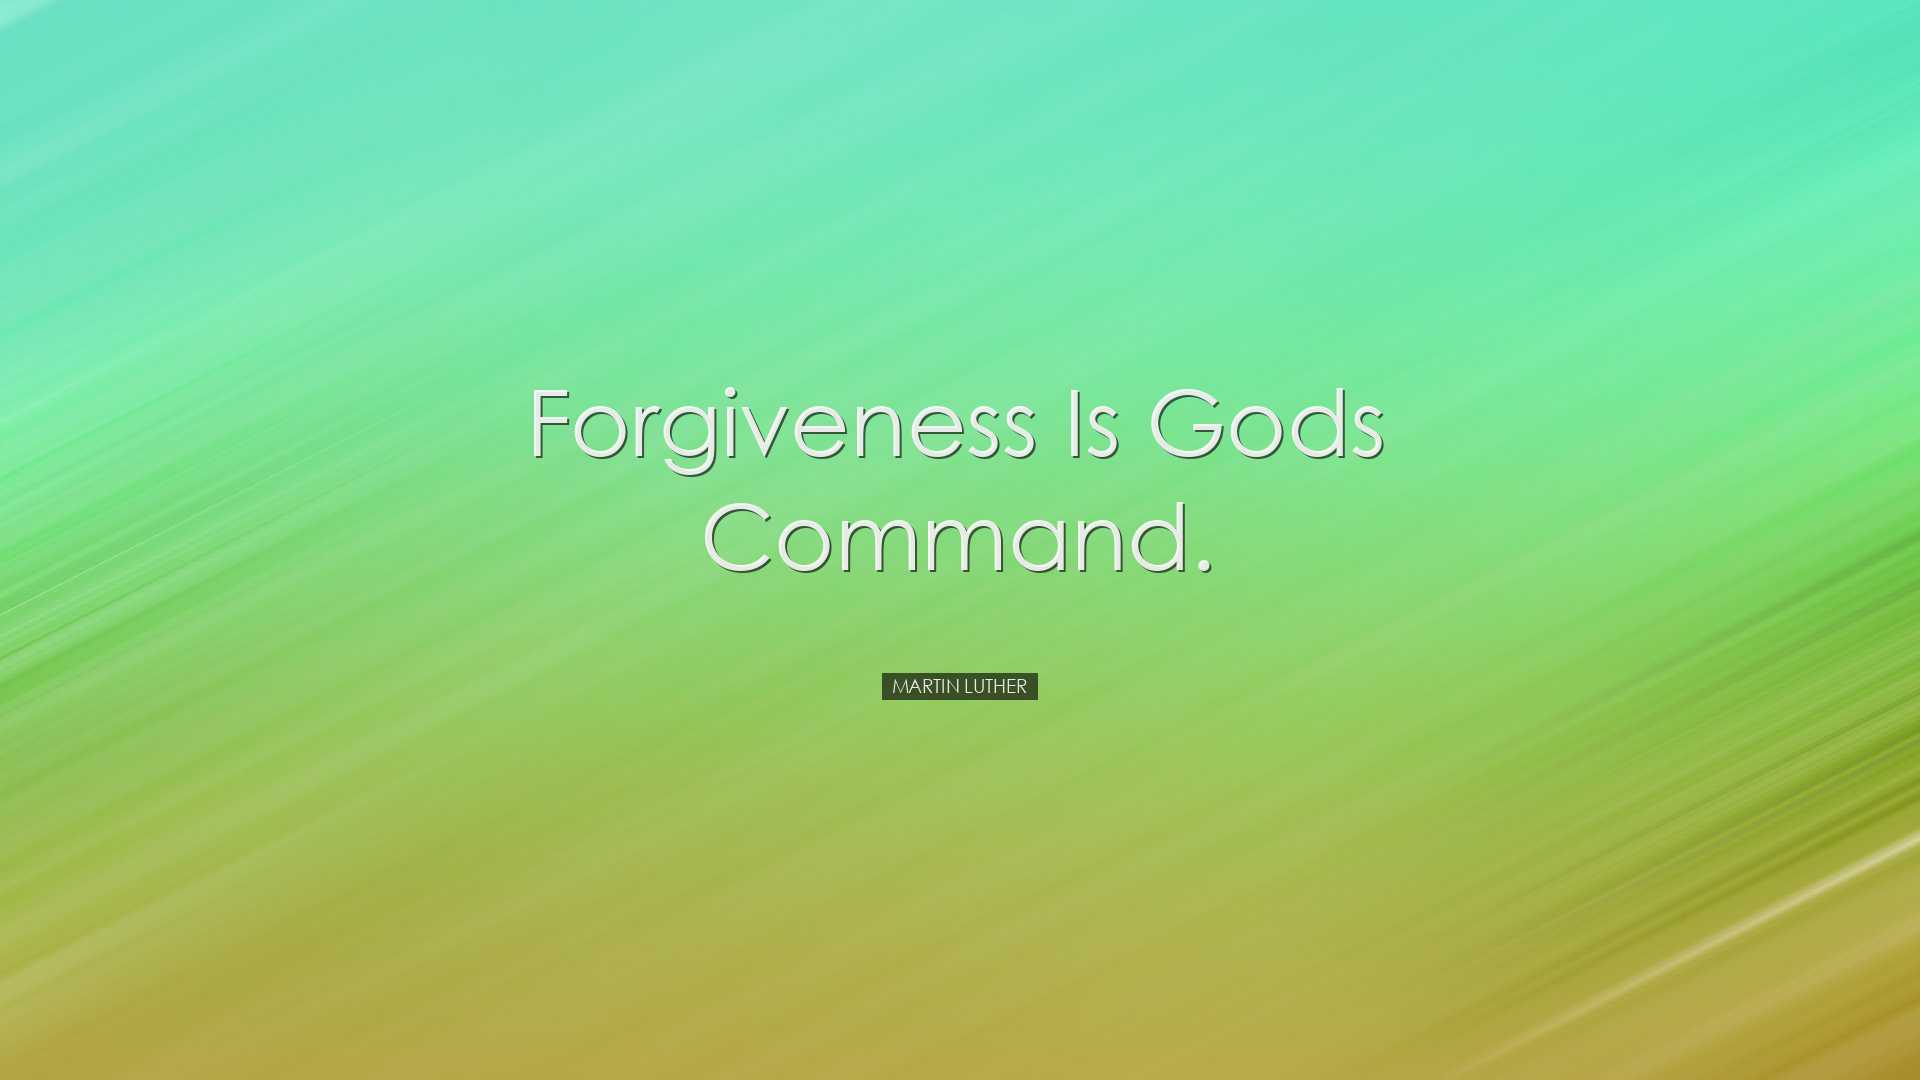 Forgiveness is Gods command. - Martin Luther